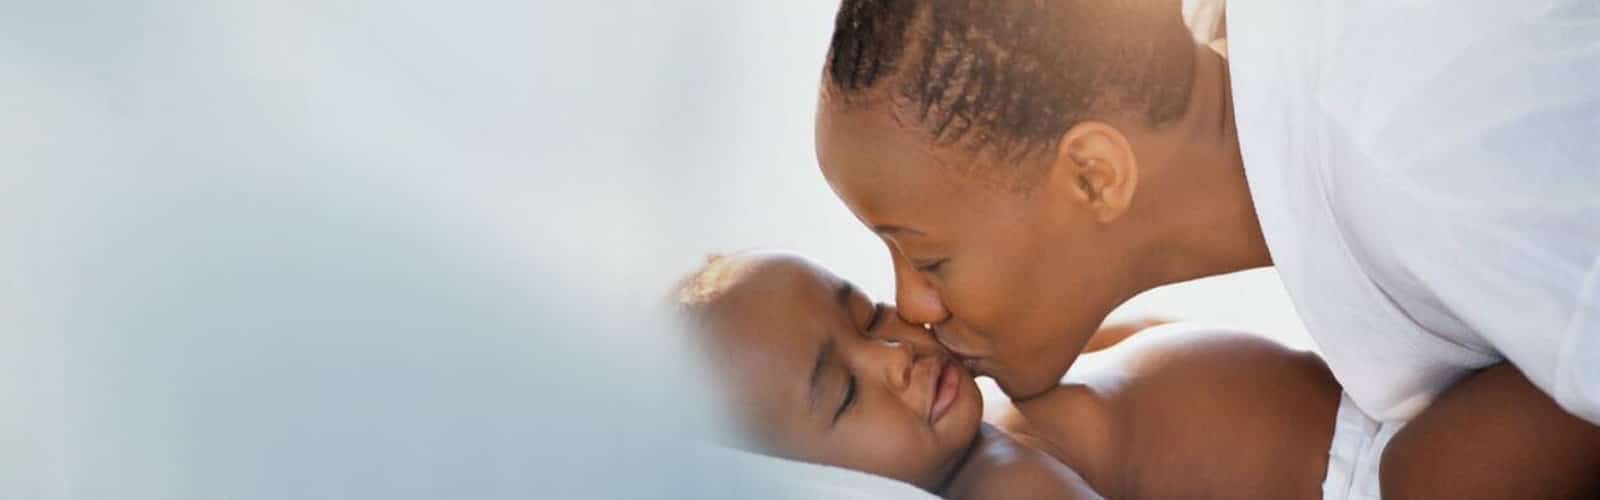 Surrogacy Clinic in Kenya – One stop destination for all childless couples - Kenya IVF